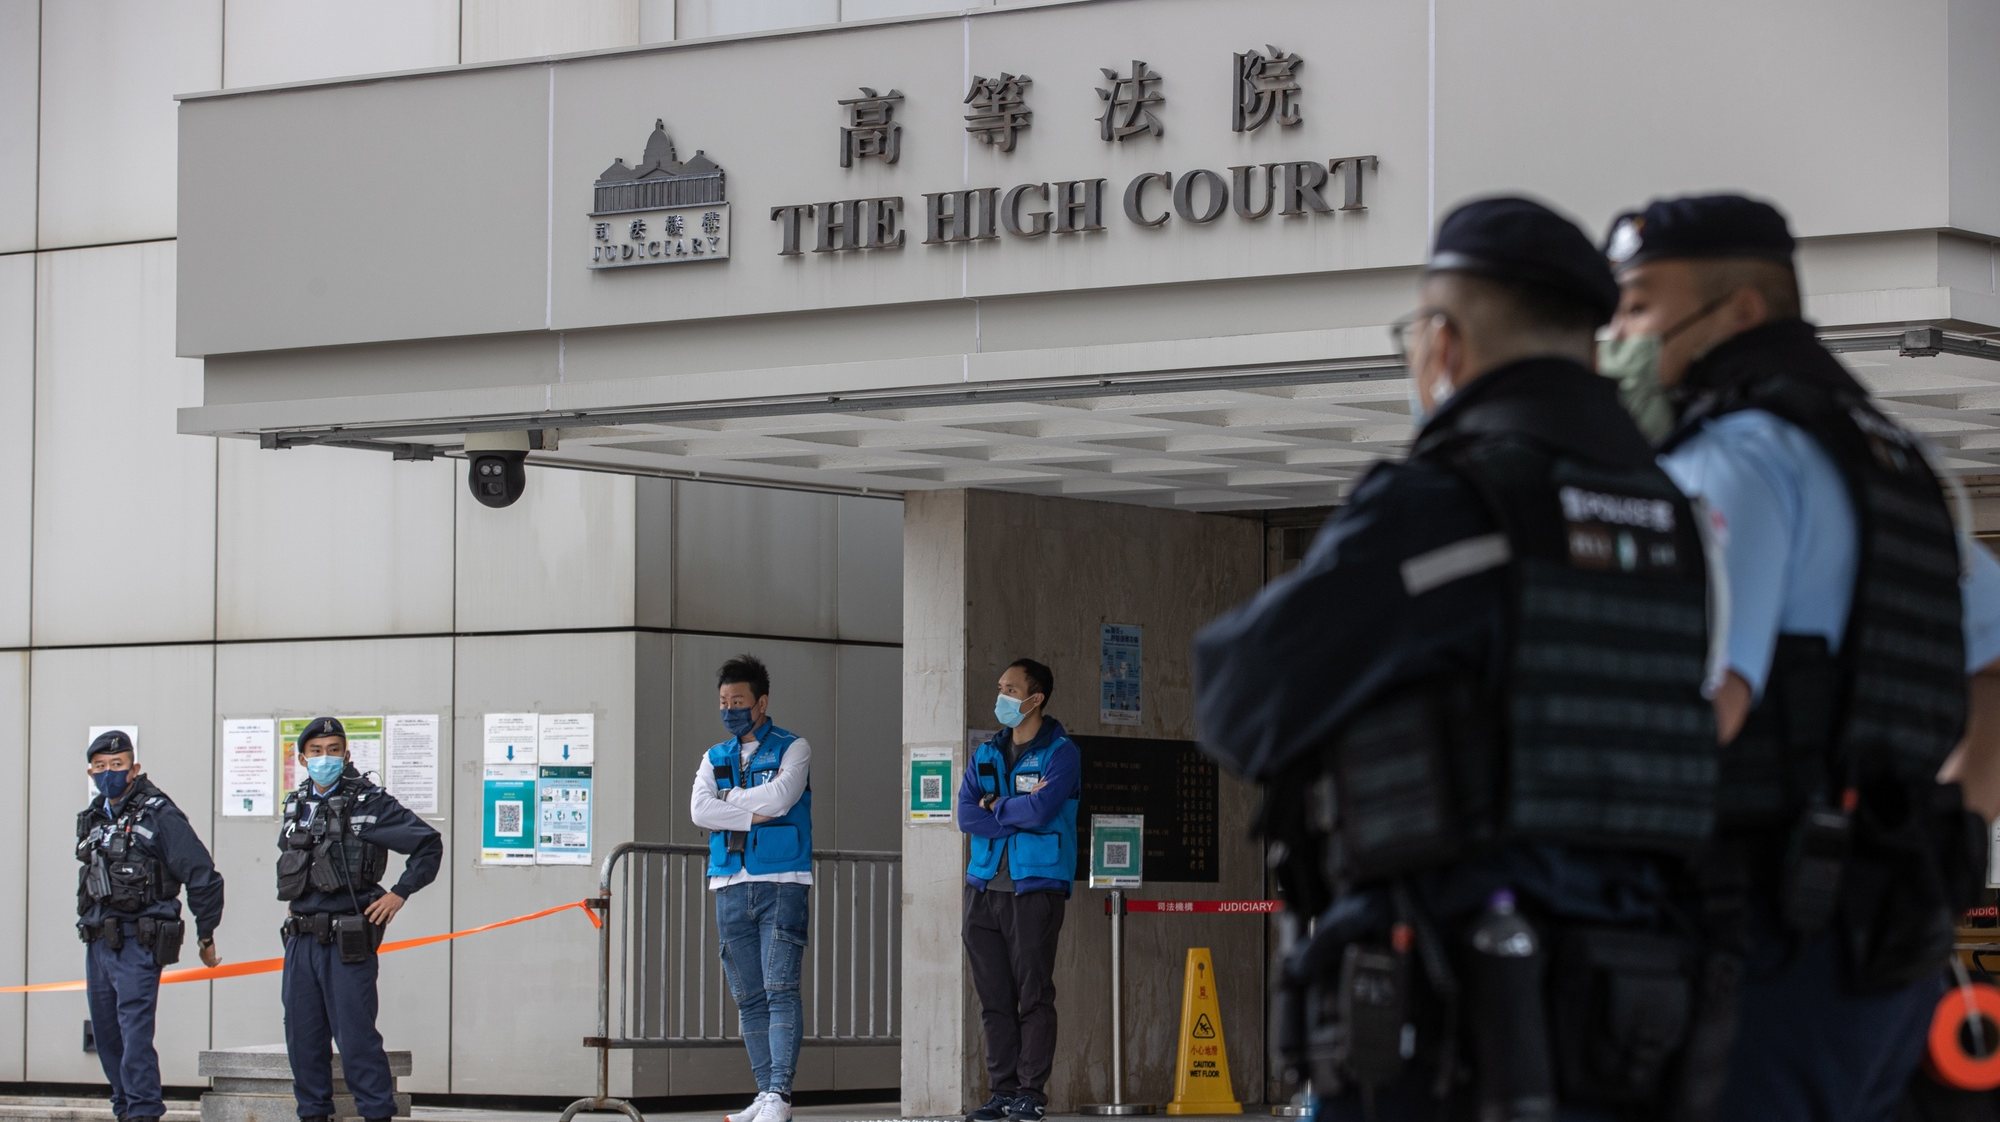 epa10340514 Police stand guard outside the High Court on the first day of the trial under national security law of media tycoon Jimmy Lai Chee-ying in Hong Kong, China, 01 December 2022. Lai is being tried under the national security law for conspiracy to print, publish, sell, offer for sale, distribute, display and/or reproduce seditious publications. Hong Kong Chief Executive John Lee Ka-chiu has asked the National Peopleâ€™s Congress (NPC) Standing Committee, Beijingâ€™s top legislative body, to interpret the cityâ€™s national security law after the Court of Final Appeal upheld a decision allowing a British barrister to defend Lai. The trial has been adjourned to 13 December 2022.  EPA/JEROME FAVRE